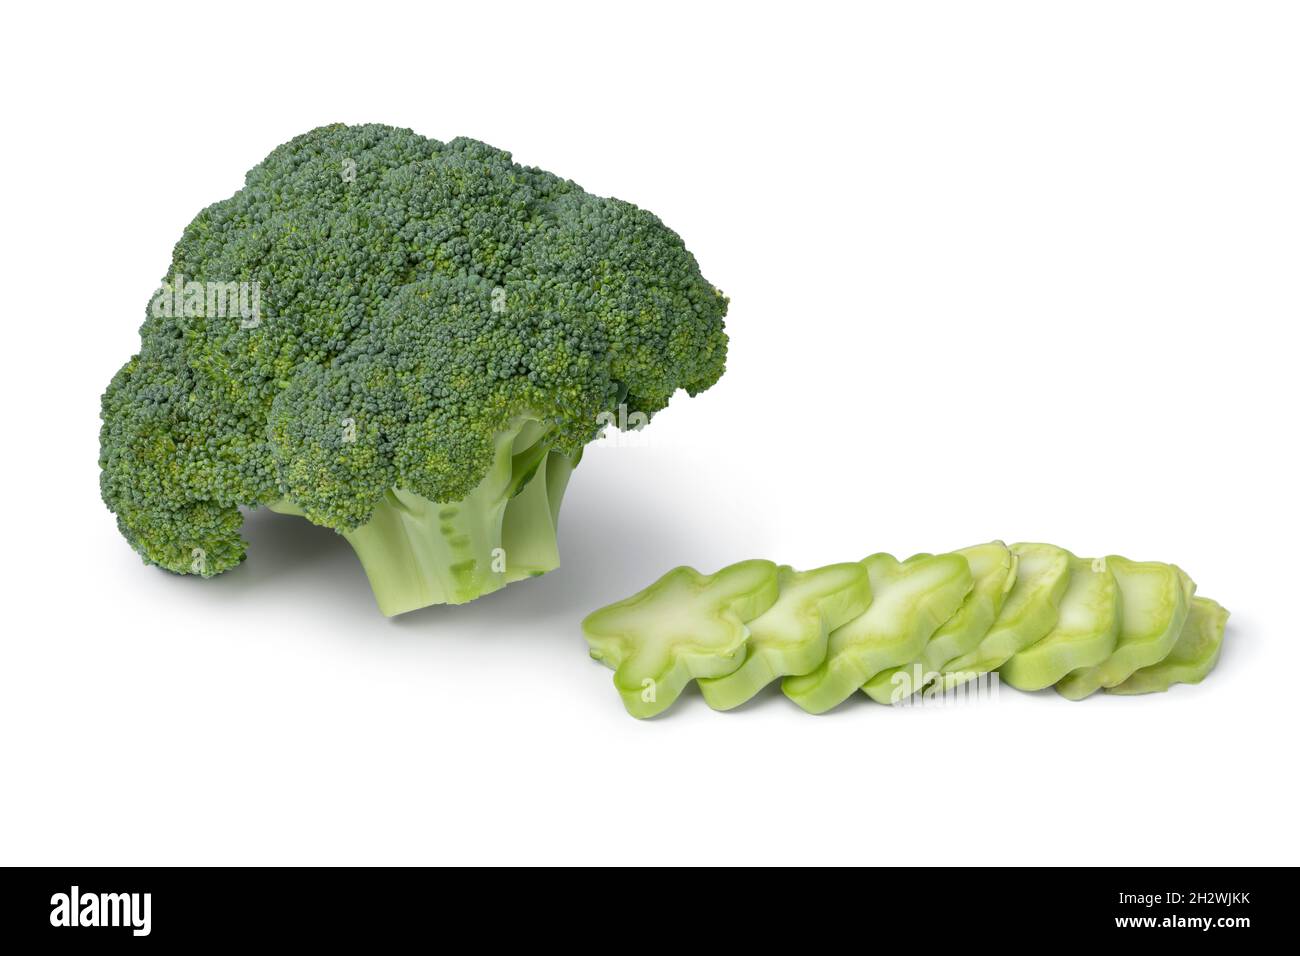 Fresh raw broccoli and a chopped stem isolated on white background Stock Photo